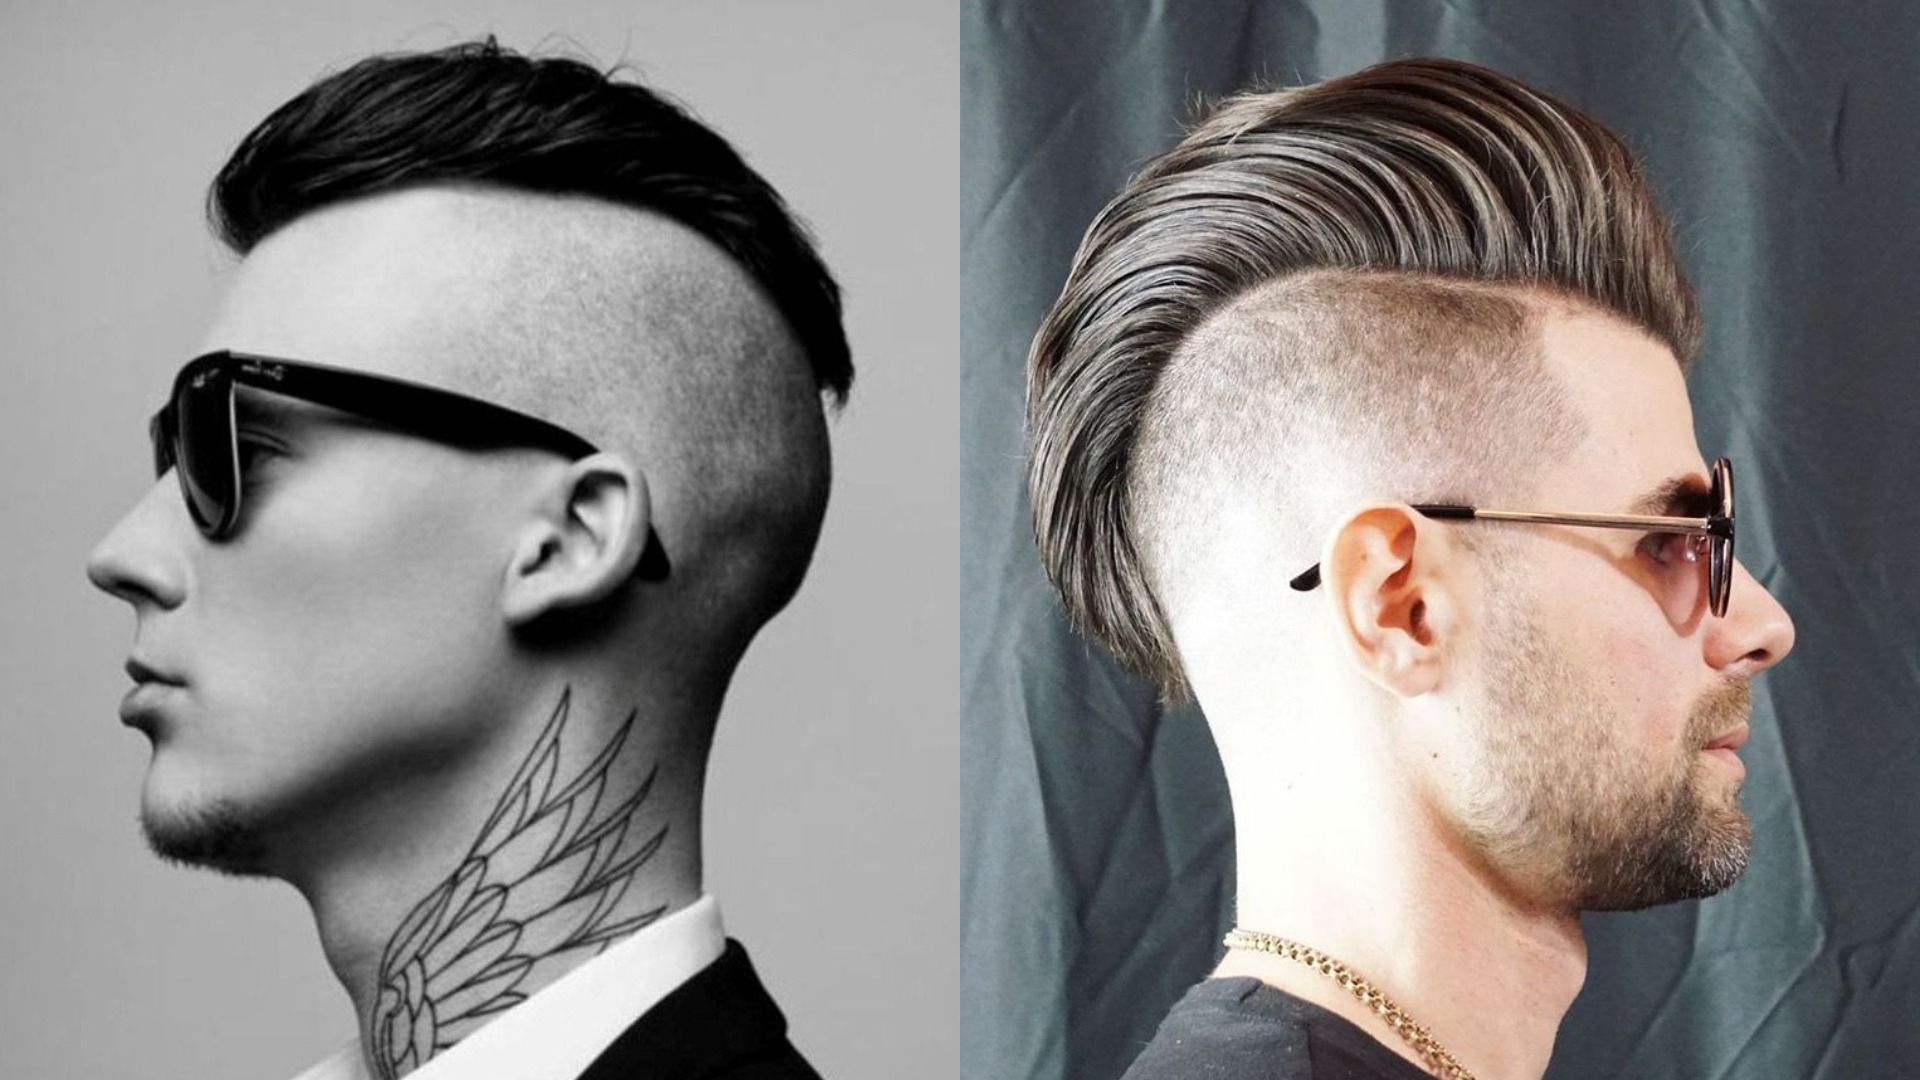 Mohawk Hairstyles: 50 Best Haircuts For Men 2018 – Atoz Inside Well Liked Sharp Cut Mohawk Hairstyles (View 17 of 20)